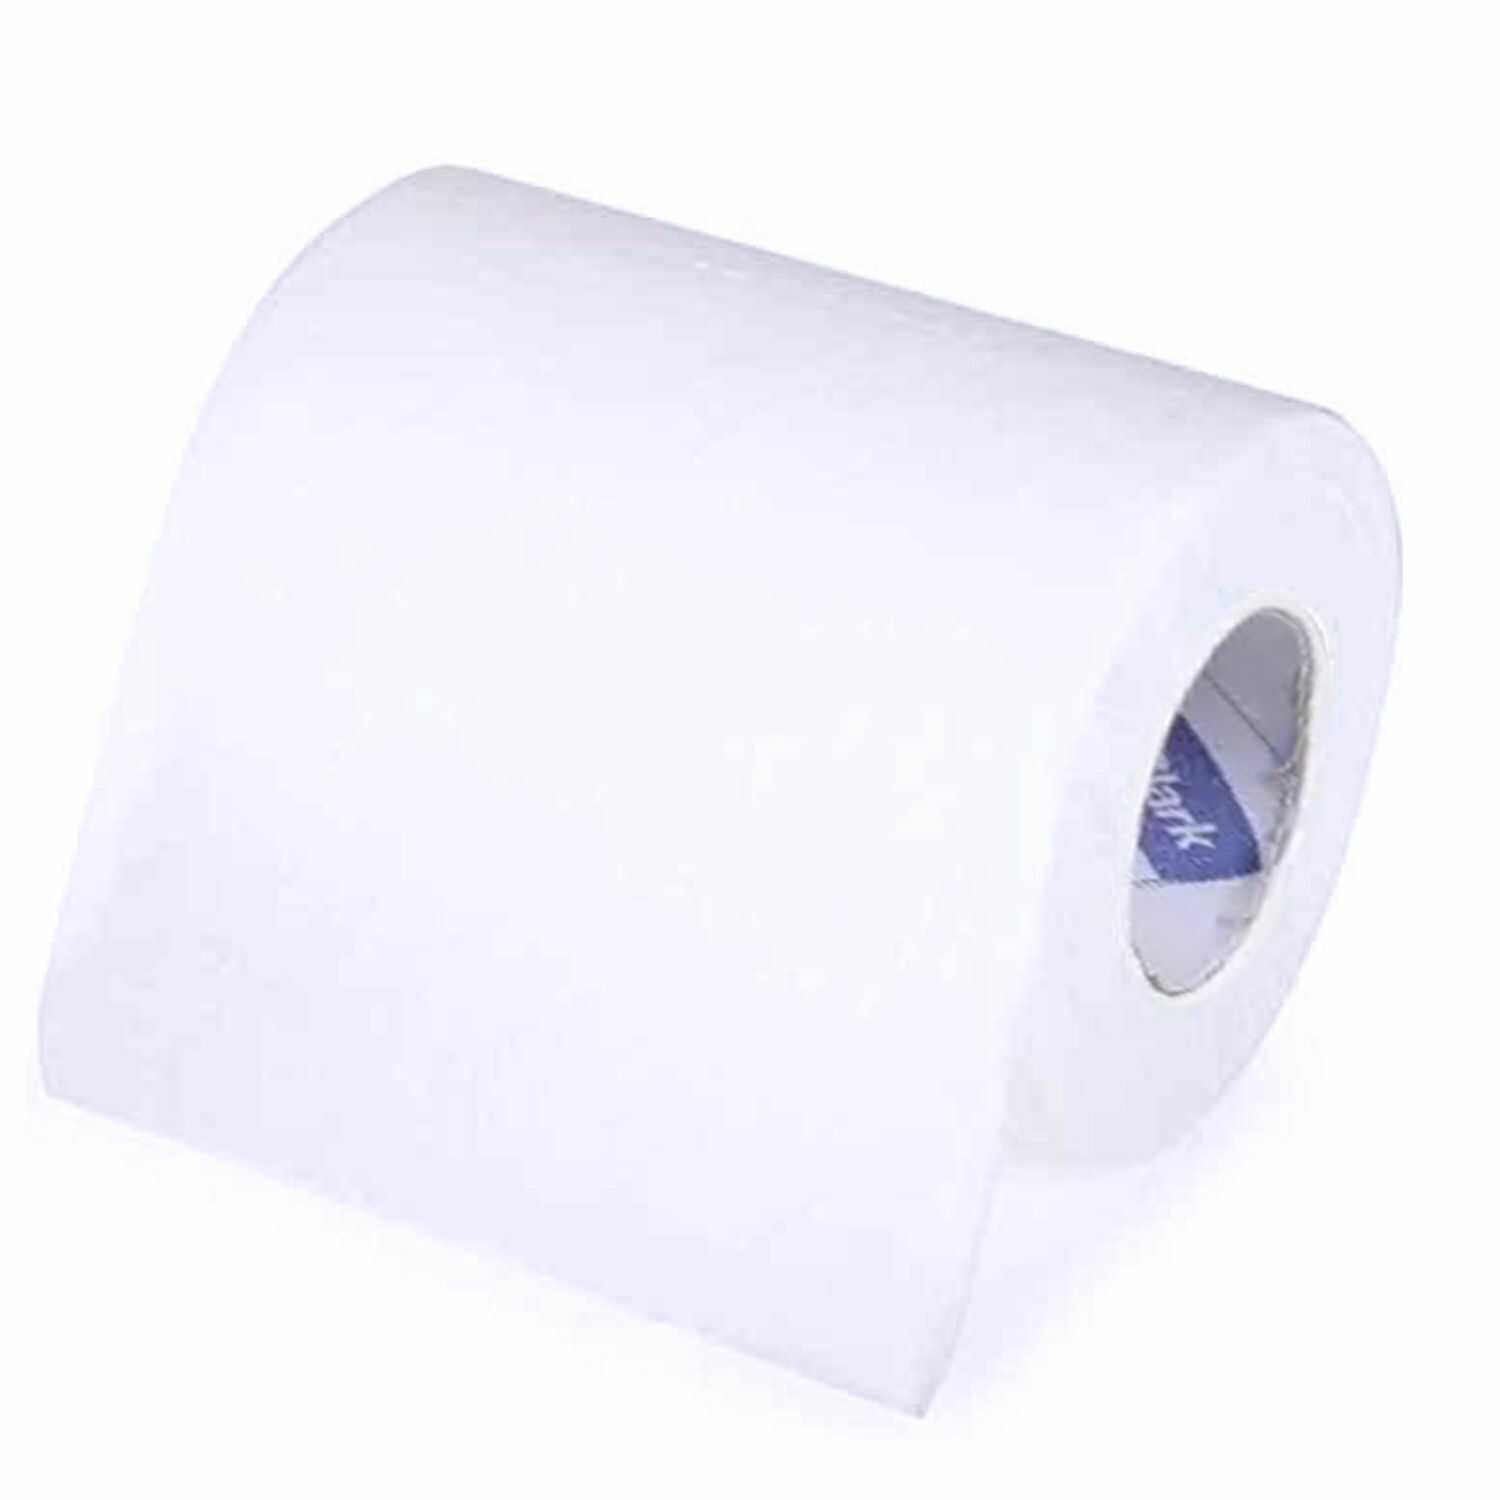 Kimberly Clark* Scott* Essential Bathroom Tissue Roll, 1192 (Pack of 150 Rolls/Case, 150 Sheets/Pack, Total 22,500 Sheets )